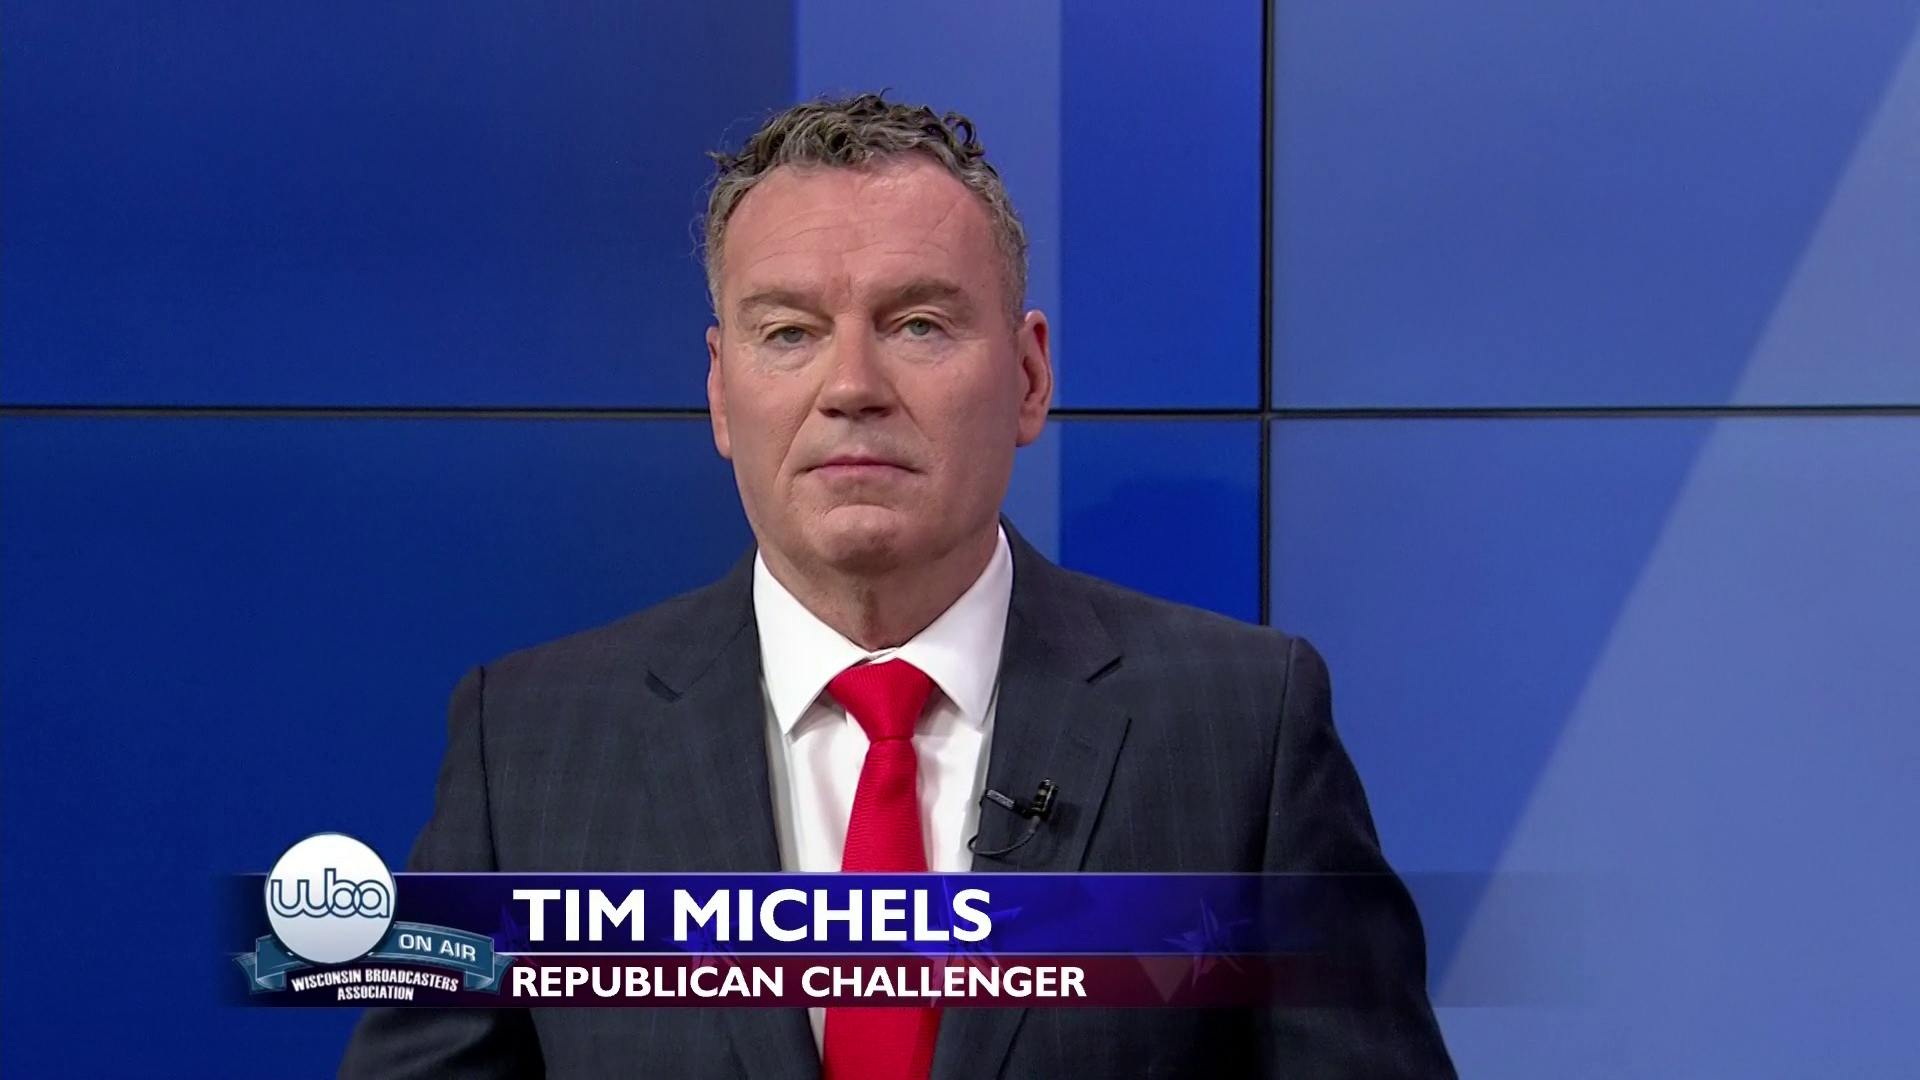 Tim Michels faces a camera during a televised debate.